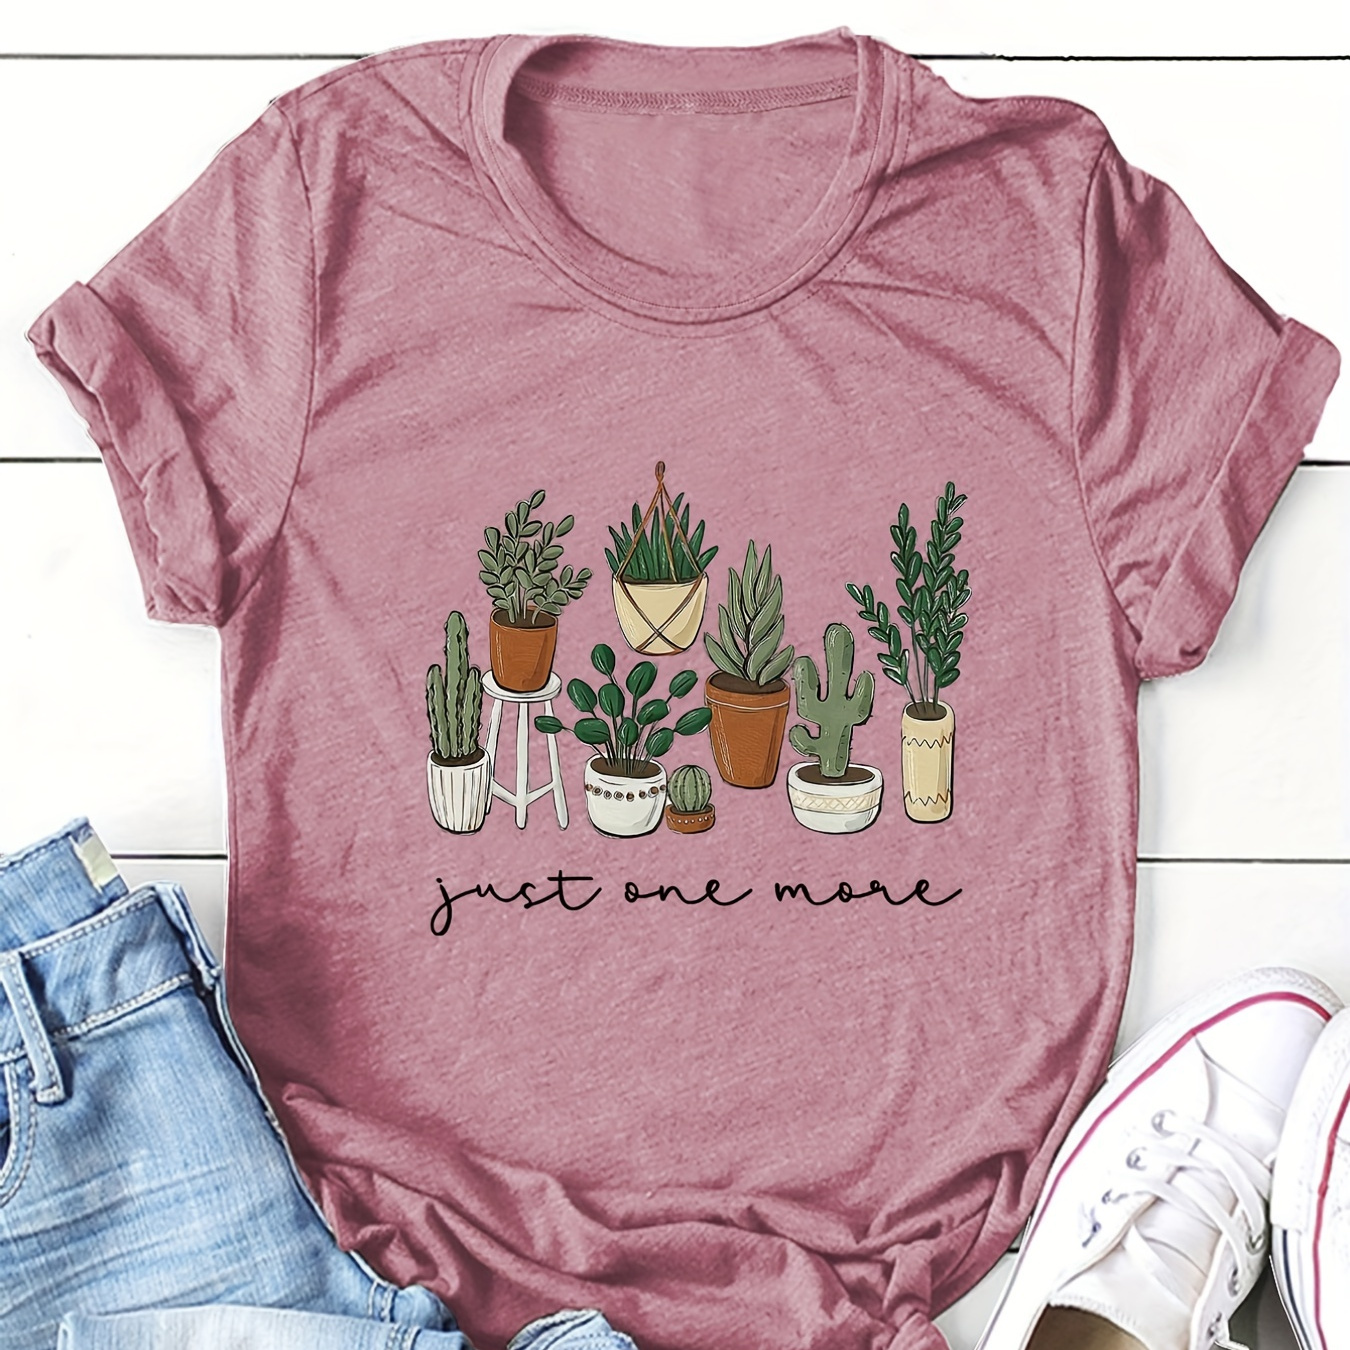 

Cactus & Letter Print T-shirt, Crew Neck Short Sleeve T-shirt, Casual Every Day Tops, Women's Clothing